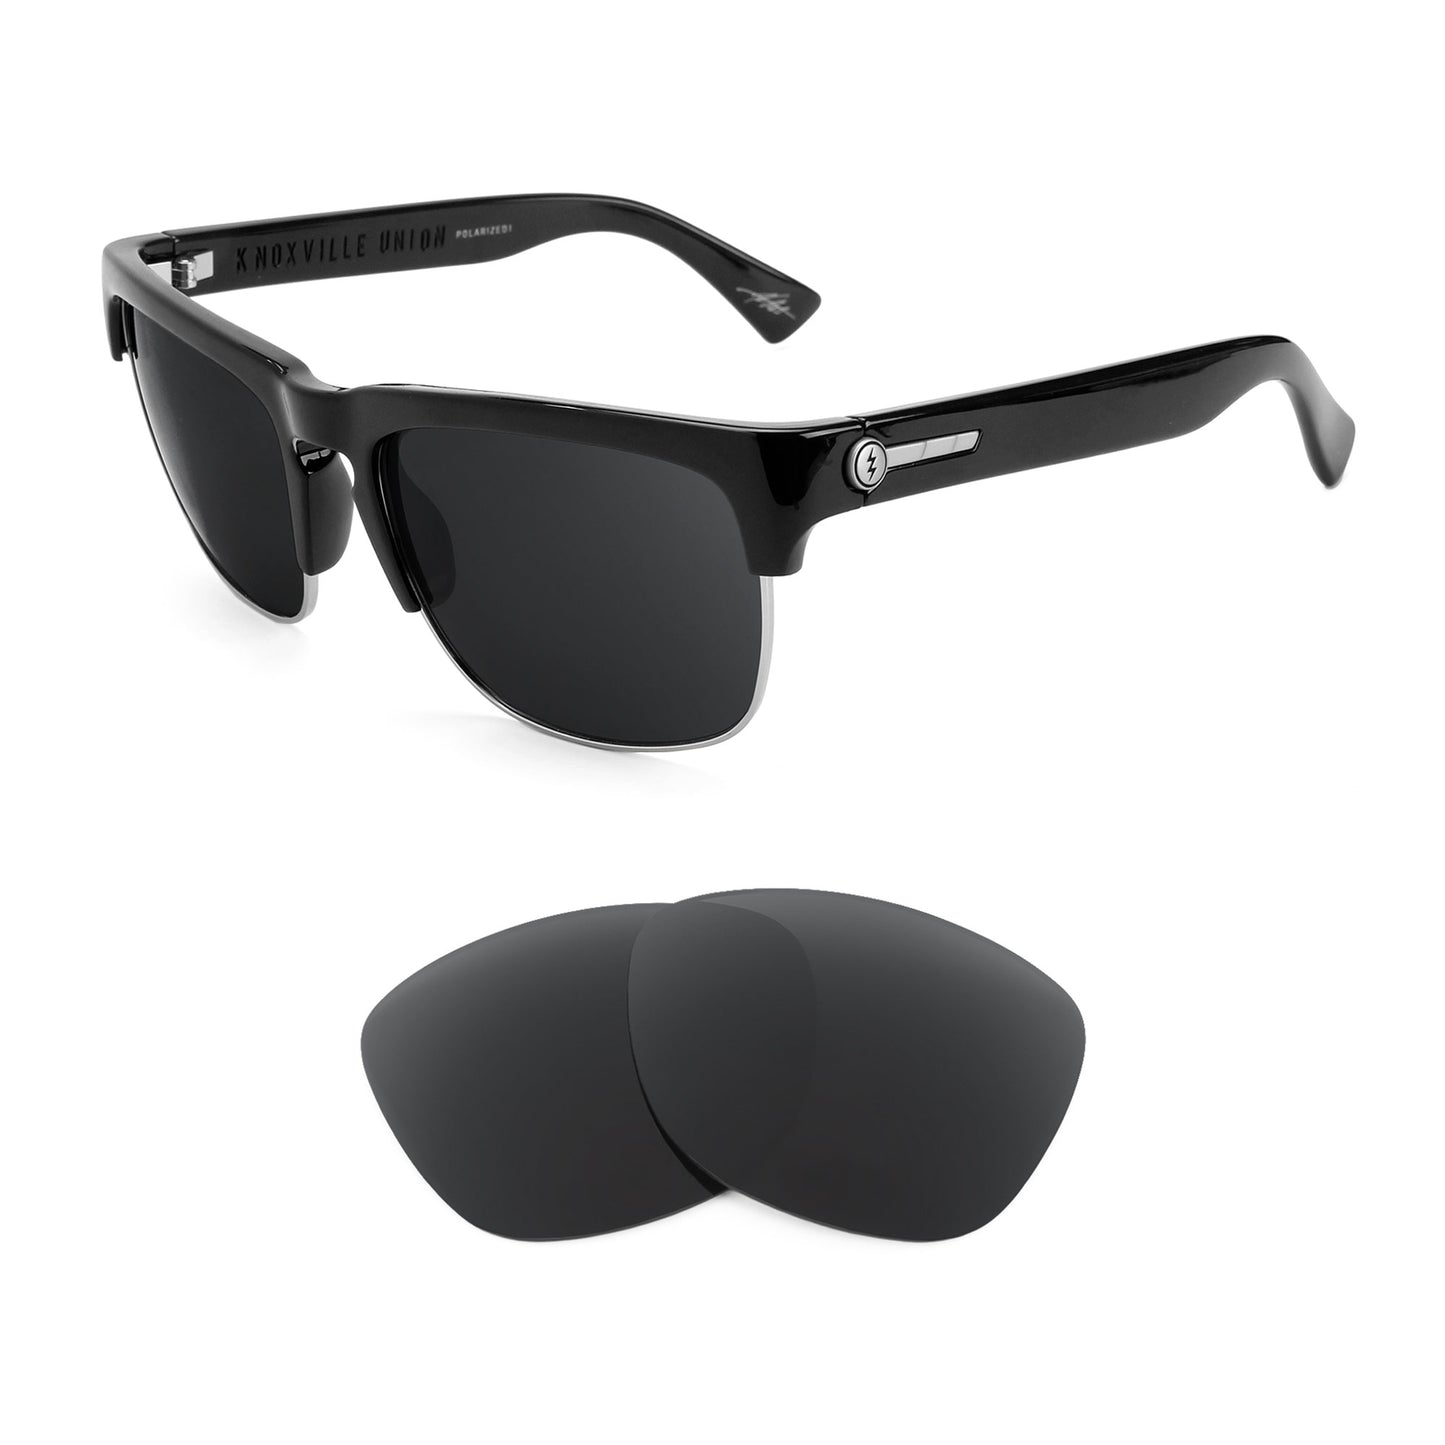 Electric Knoxville Union sunglasses with replacement lenses